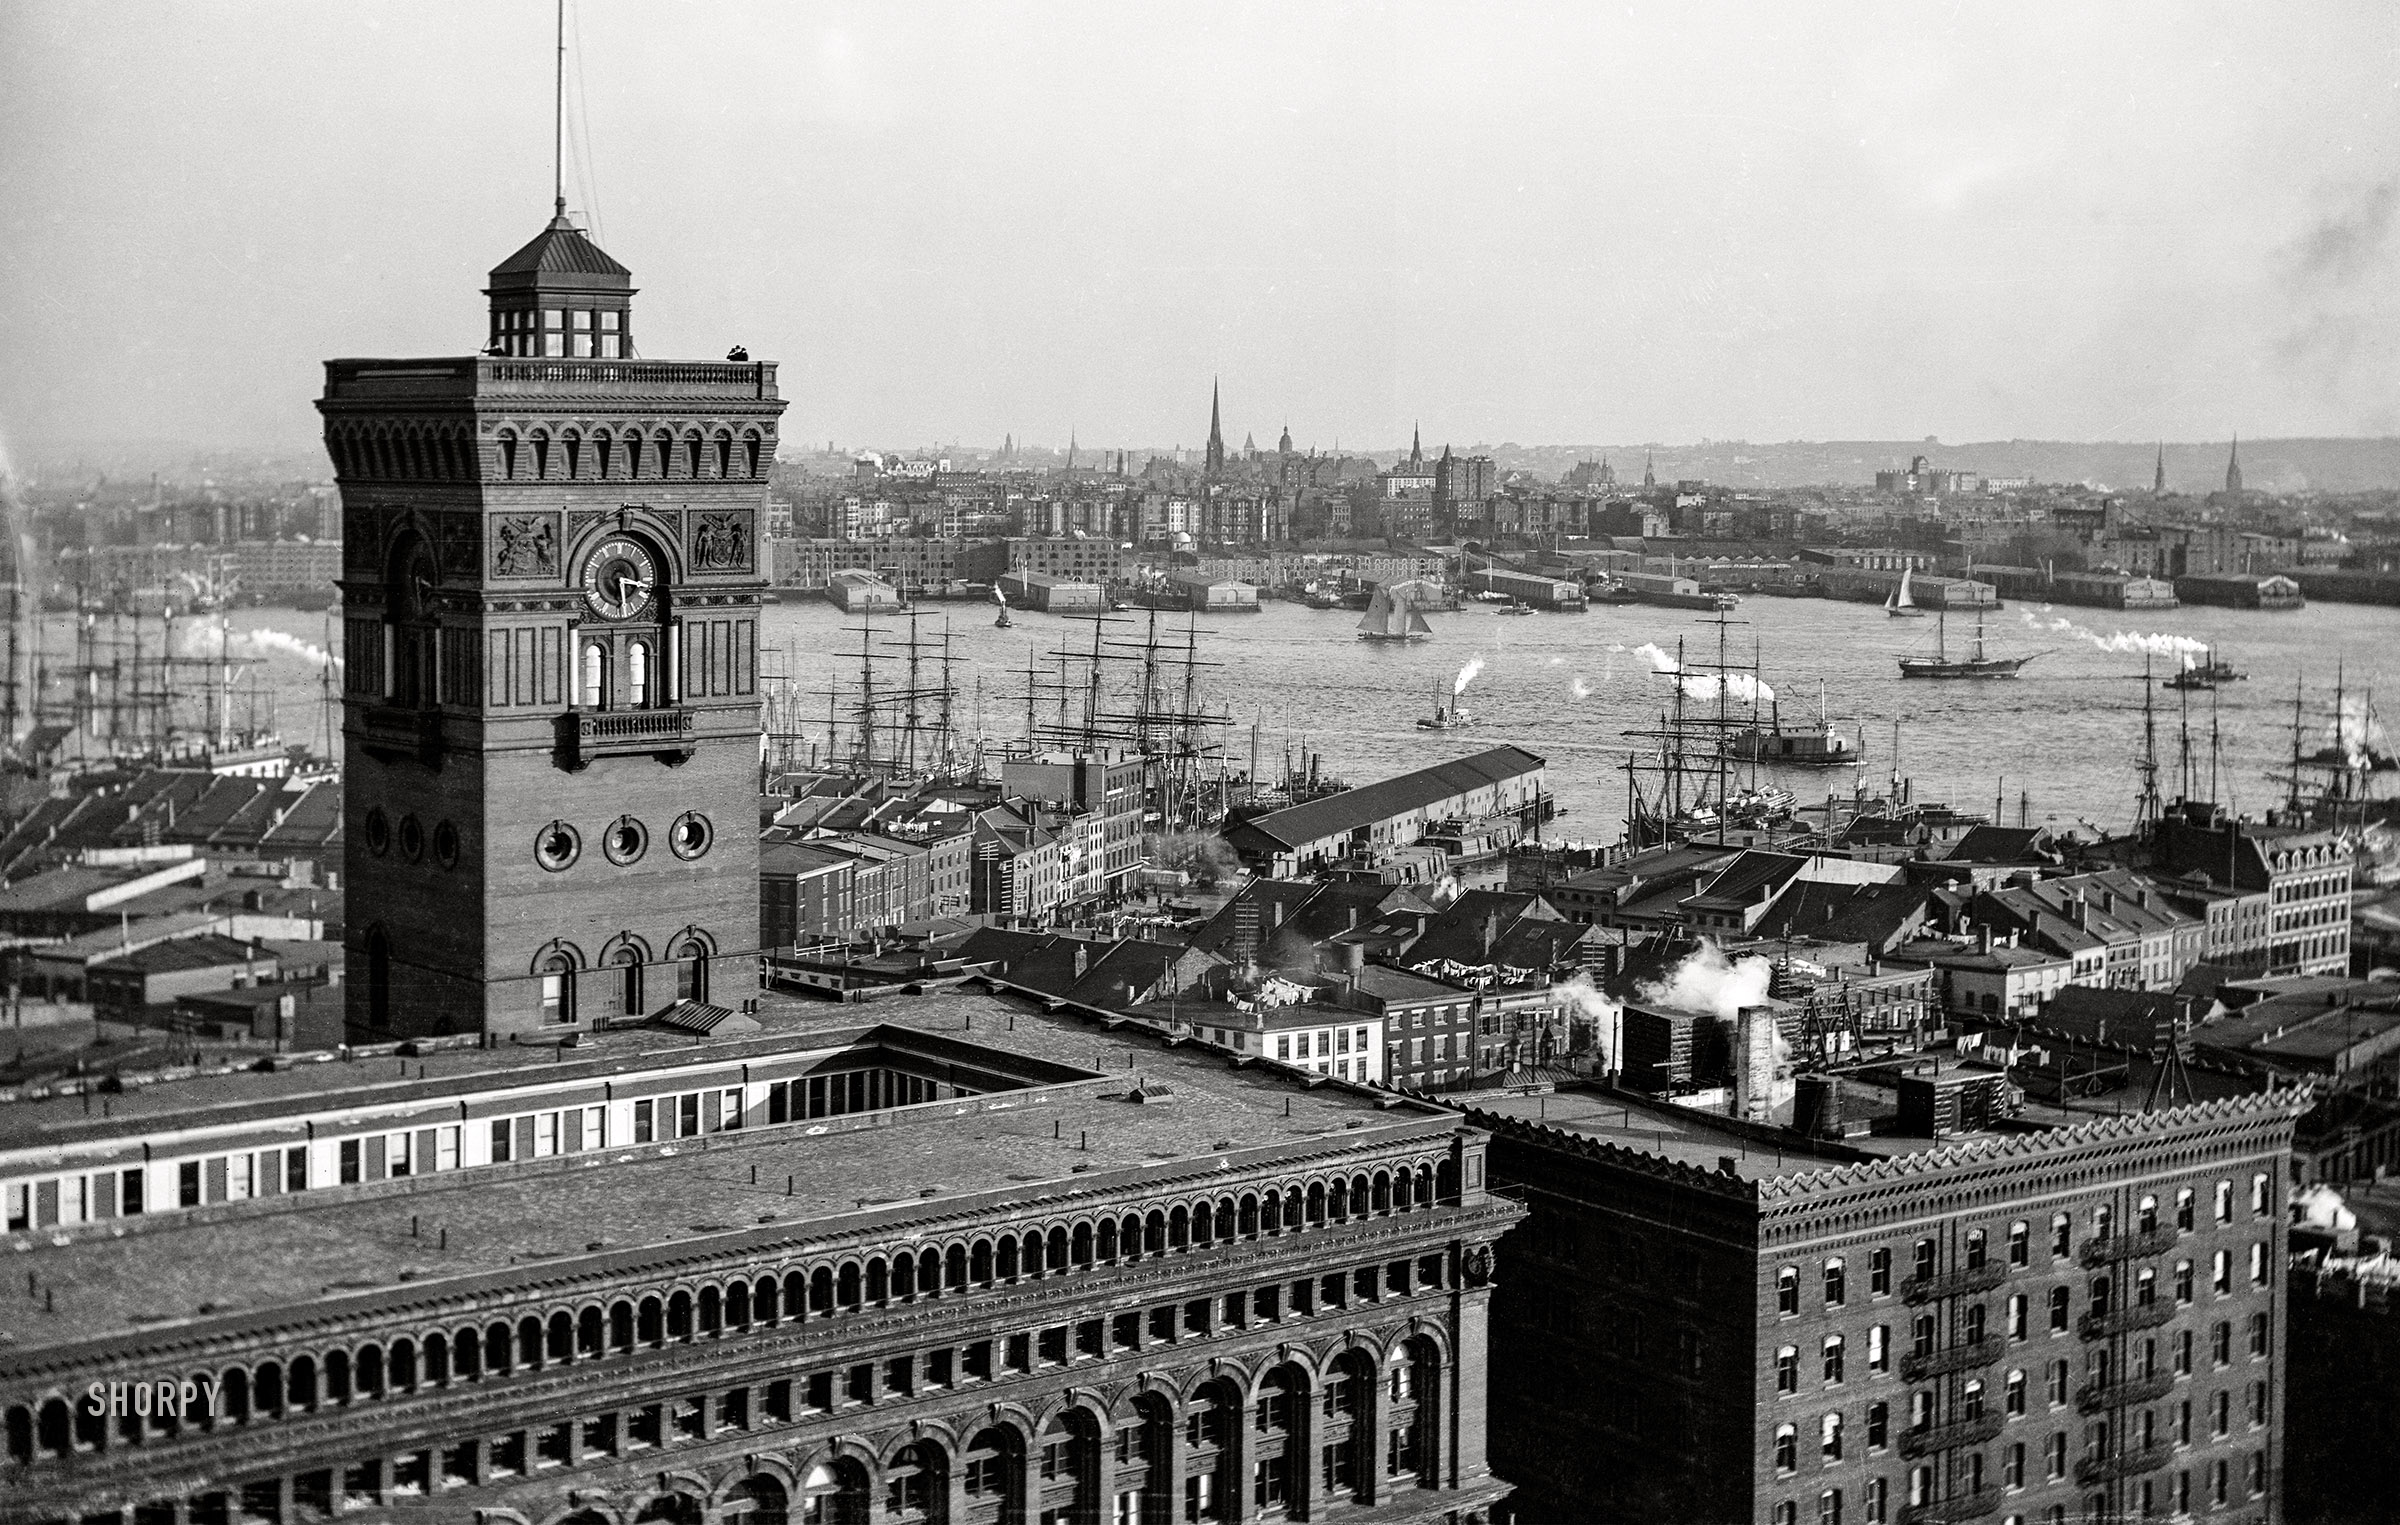 New York circa 1898. "Produce Exchange with tower, East River and Brooklyn from the Washington Building." 5x7 inch glass negative by William Henry Jackson. View full size.